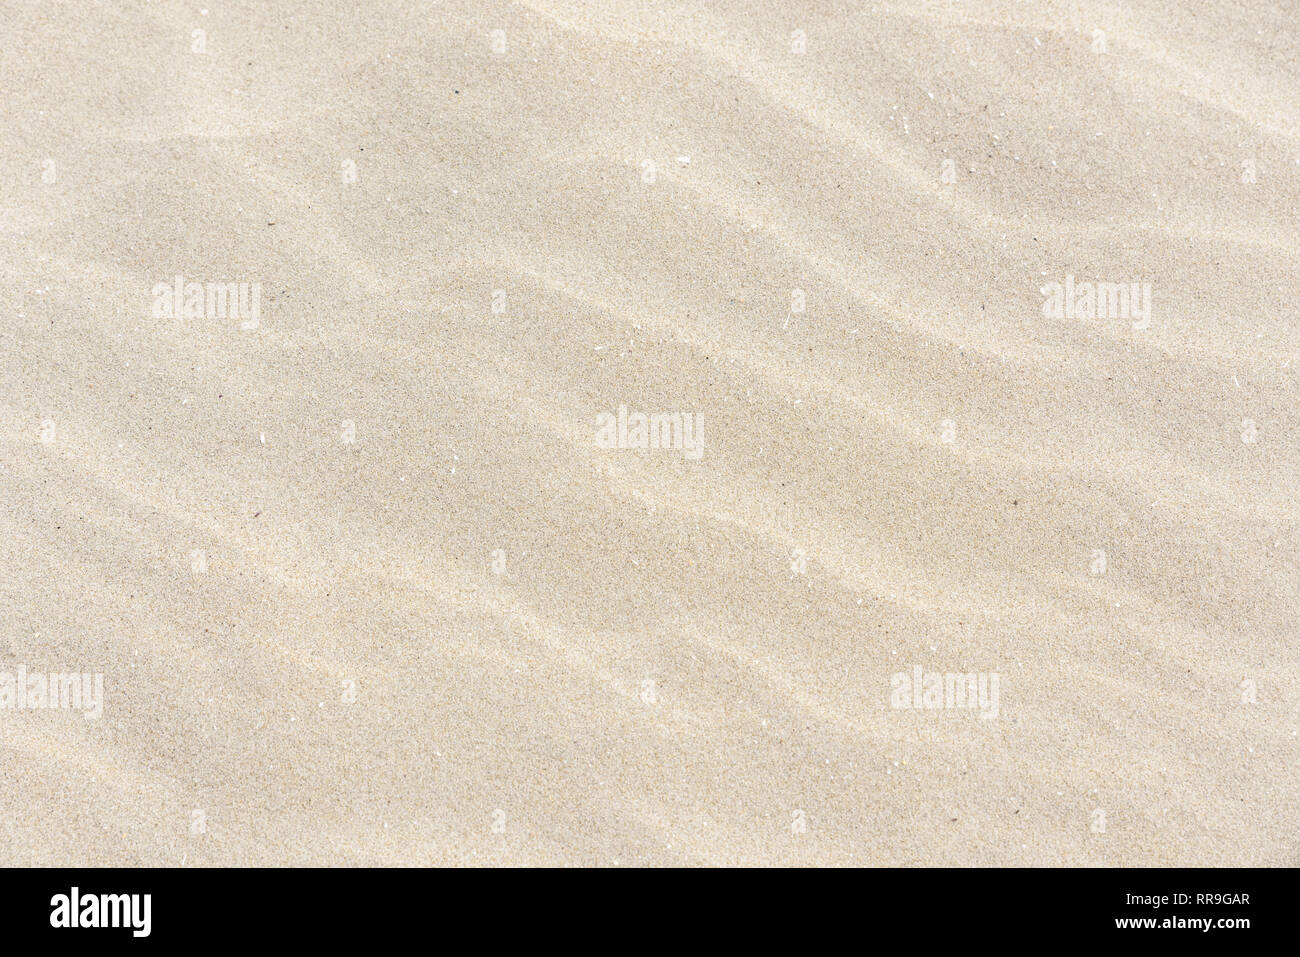 Fullframe background of nice clean ripples in the sand caused by the wind at the beach. Stock Photo